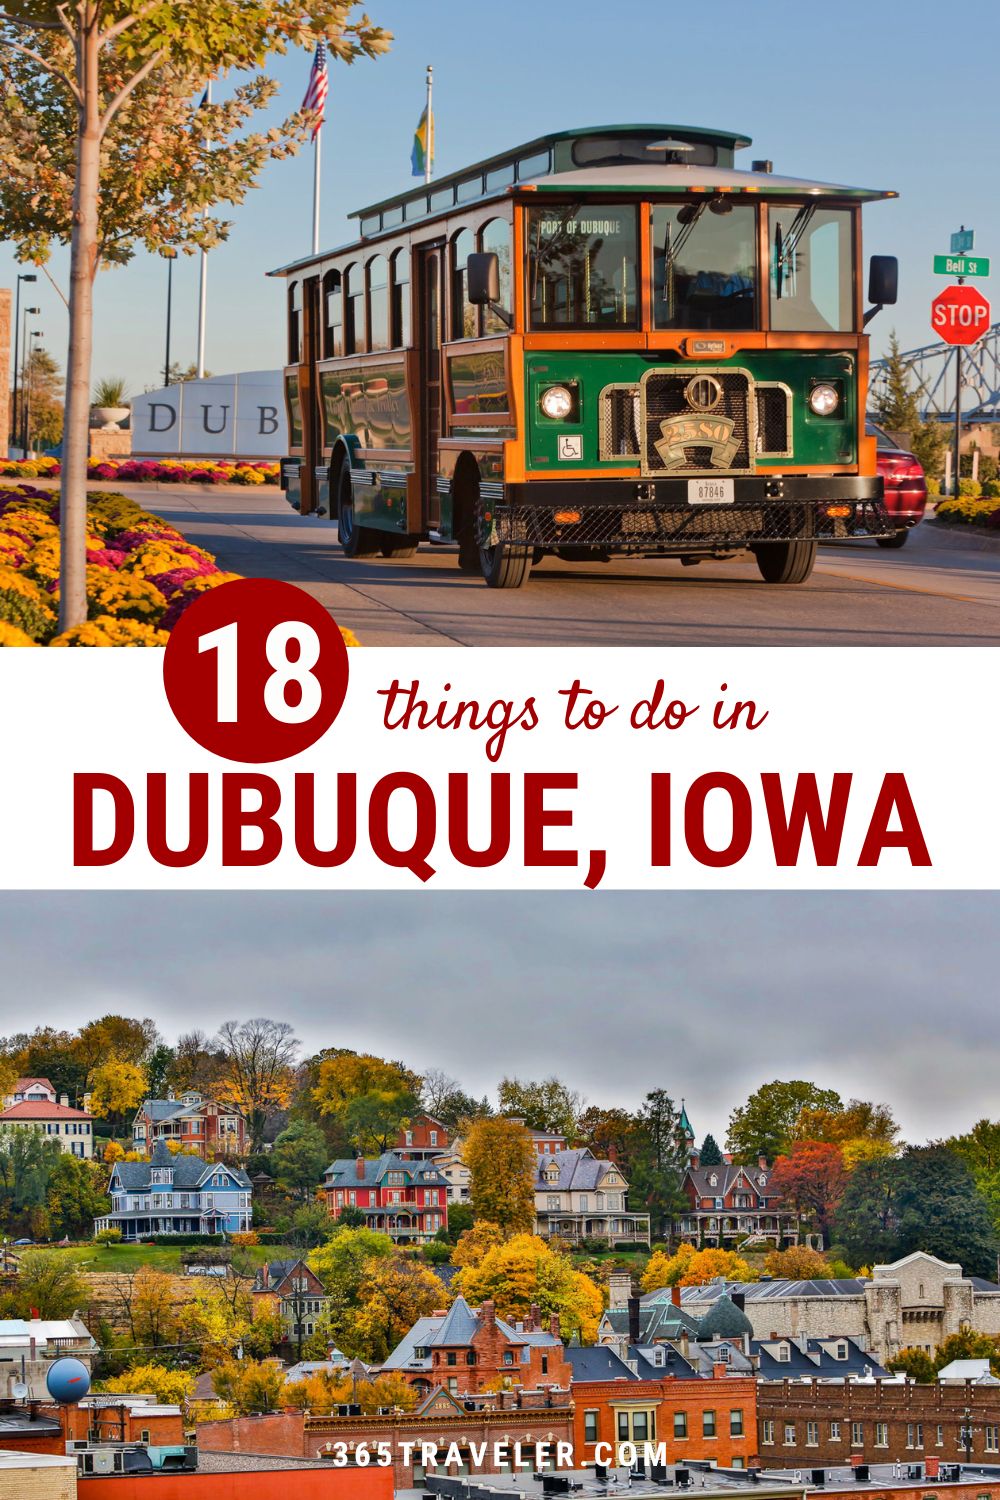 18 OUTSTANDING THINGS TO DO IN DUBUQUE IOWA